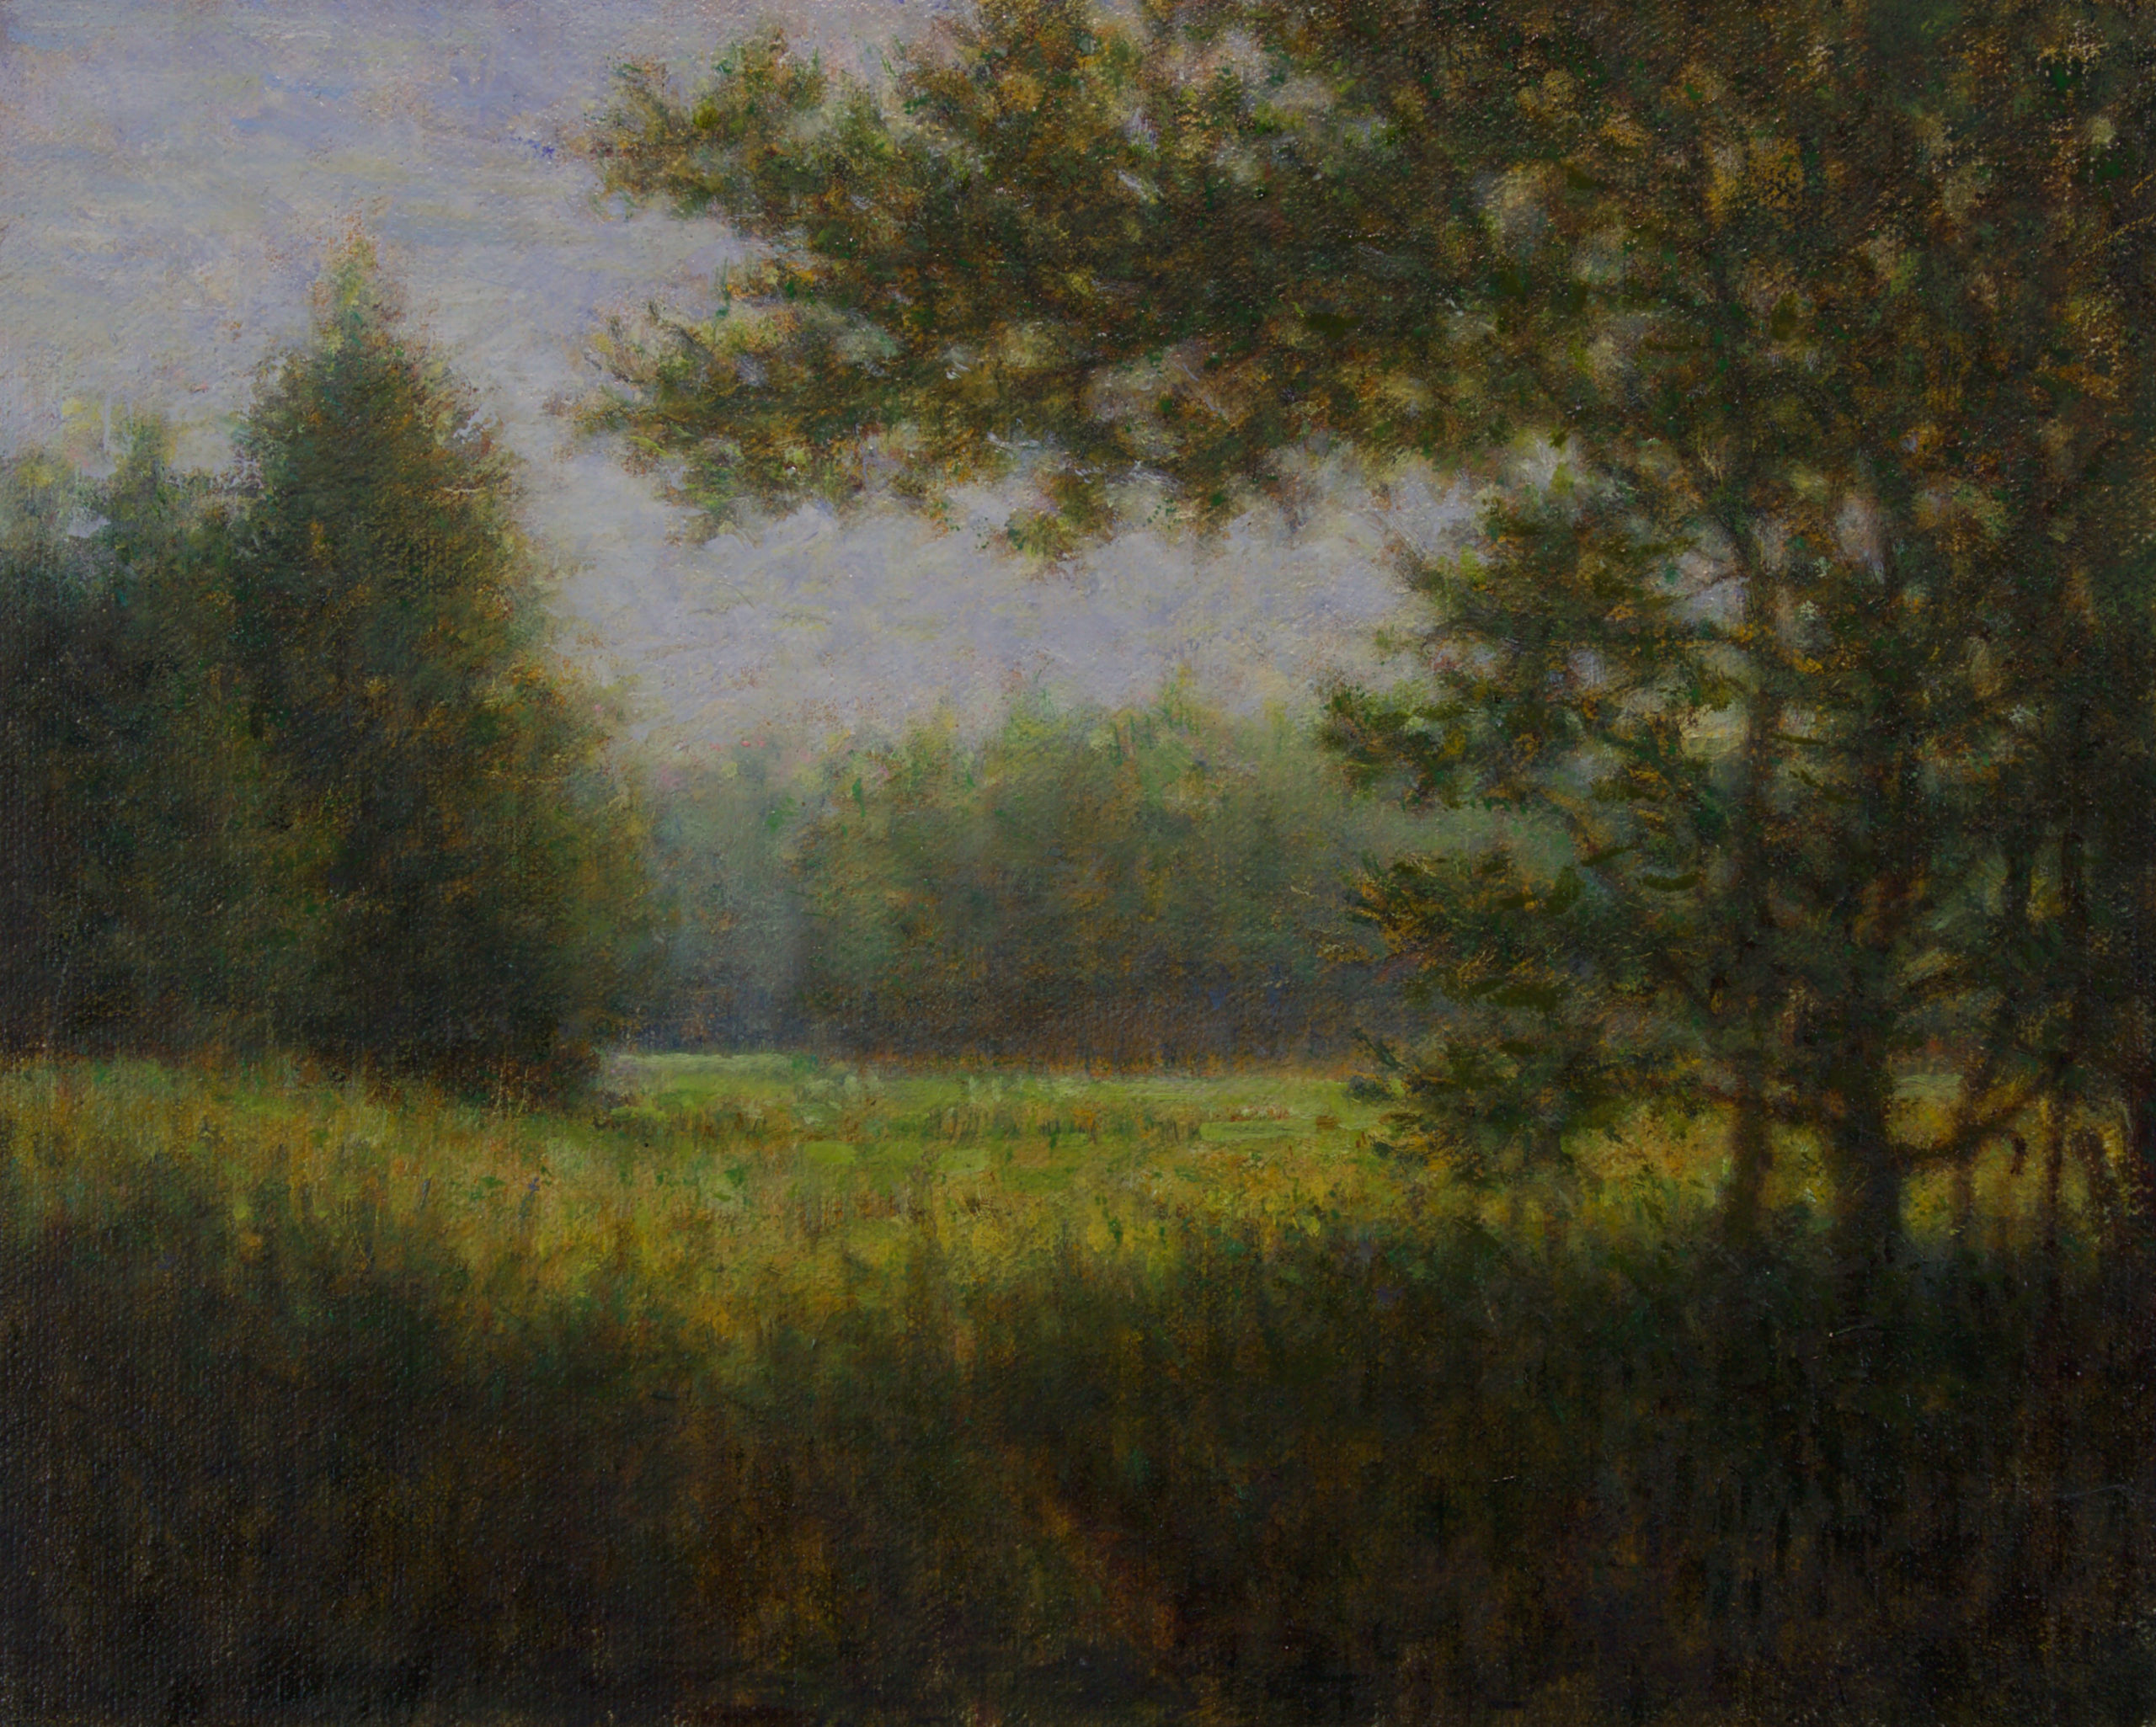 The Field by Gerry O’Neill, oil on canvas, 8×10 at Craven Allen Gallery